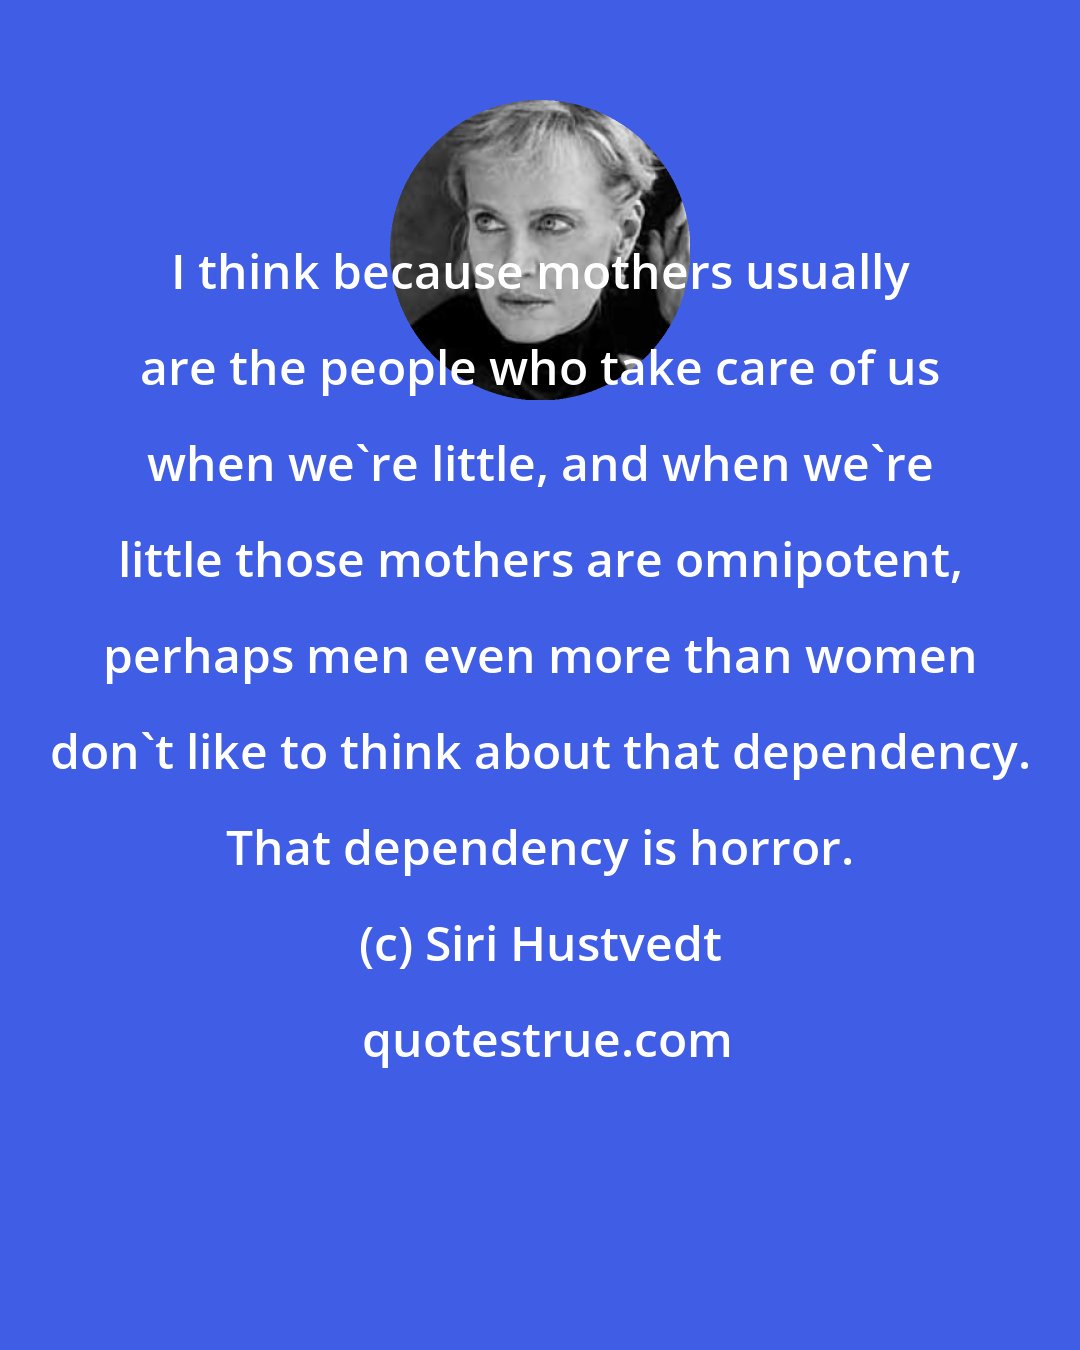 Siri Hustvedt: I think because mothers usually are the people who take care of us when we're little, and when we're little those mothers are omnipotent, perhaps men even more than women don't like to think about that dependency. That dependency is horror.